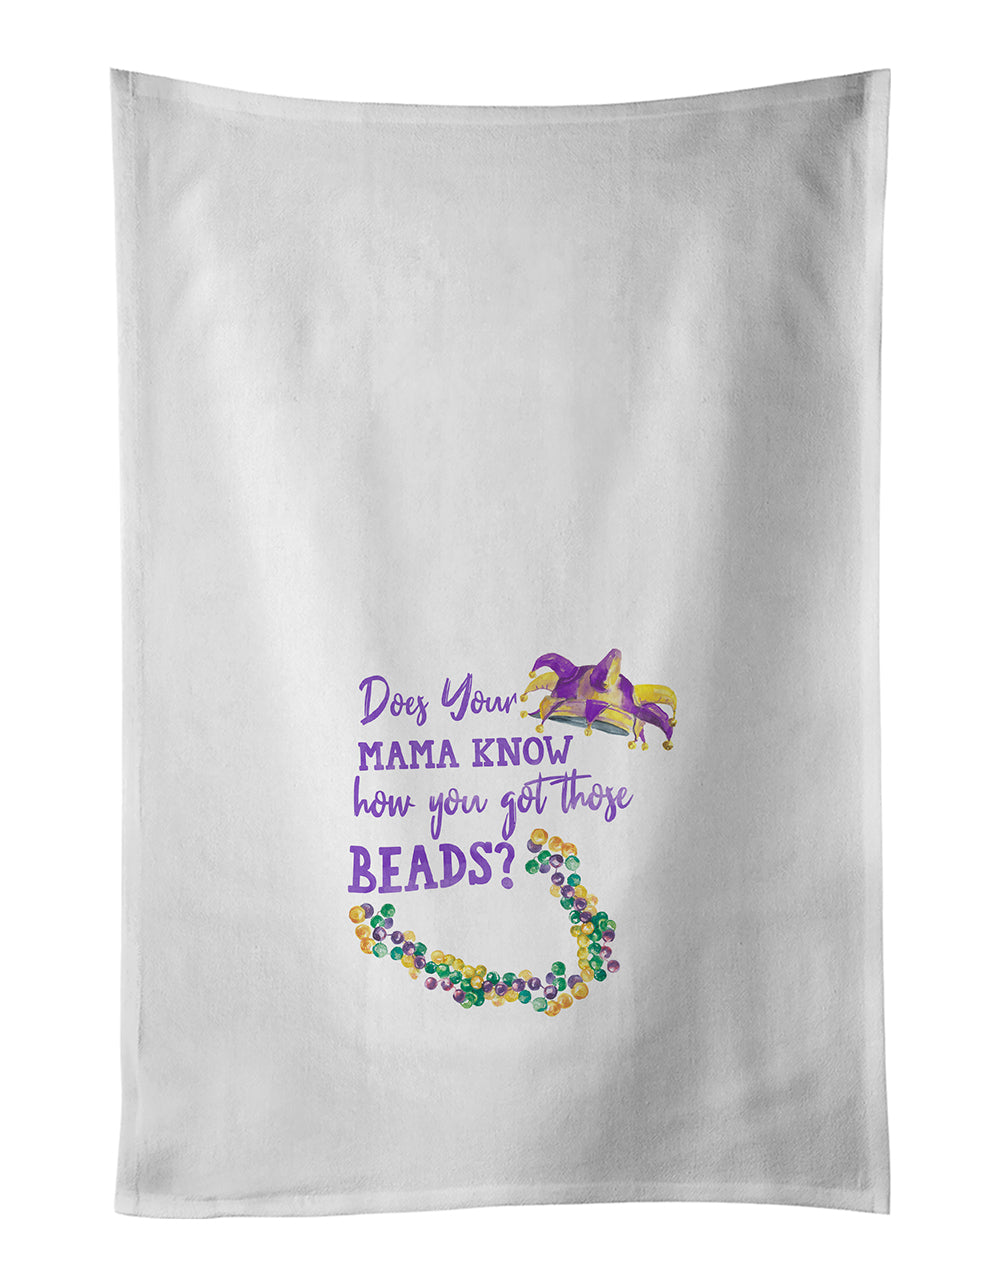 Buy this Does your Mother Know Mardi Gras White Kitchen Towel Set of 2 Dish Towels